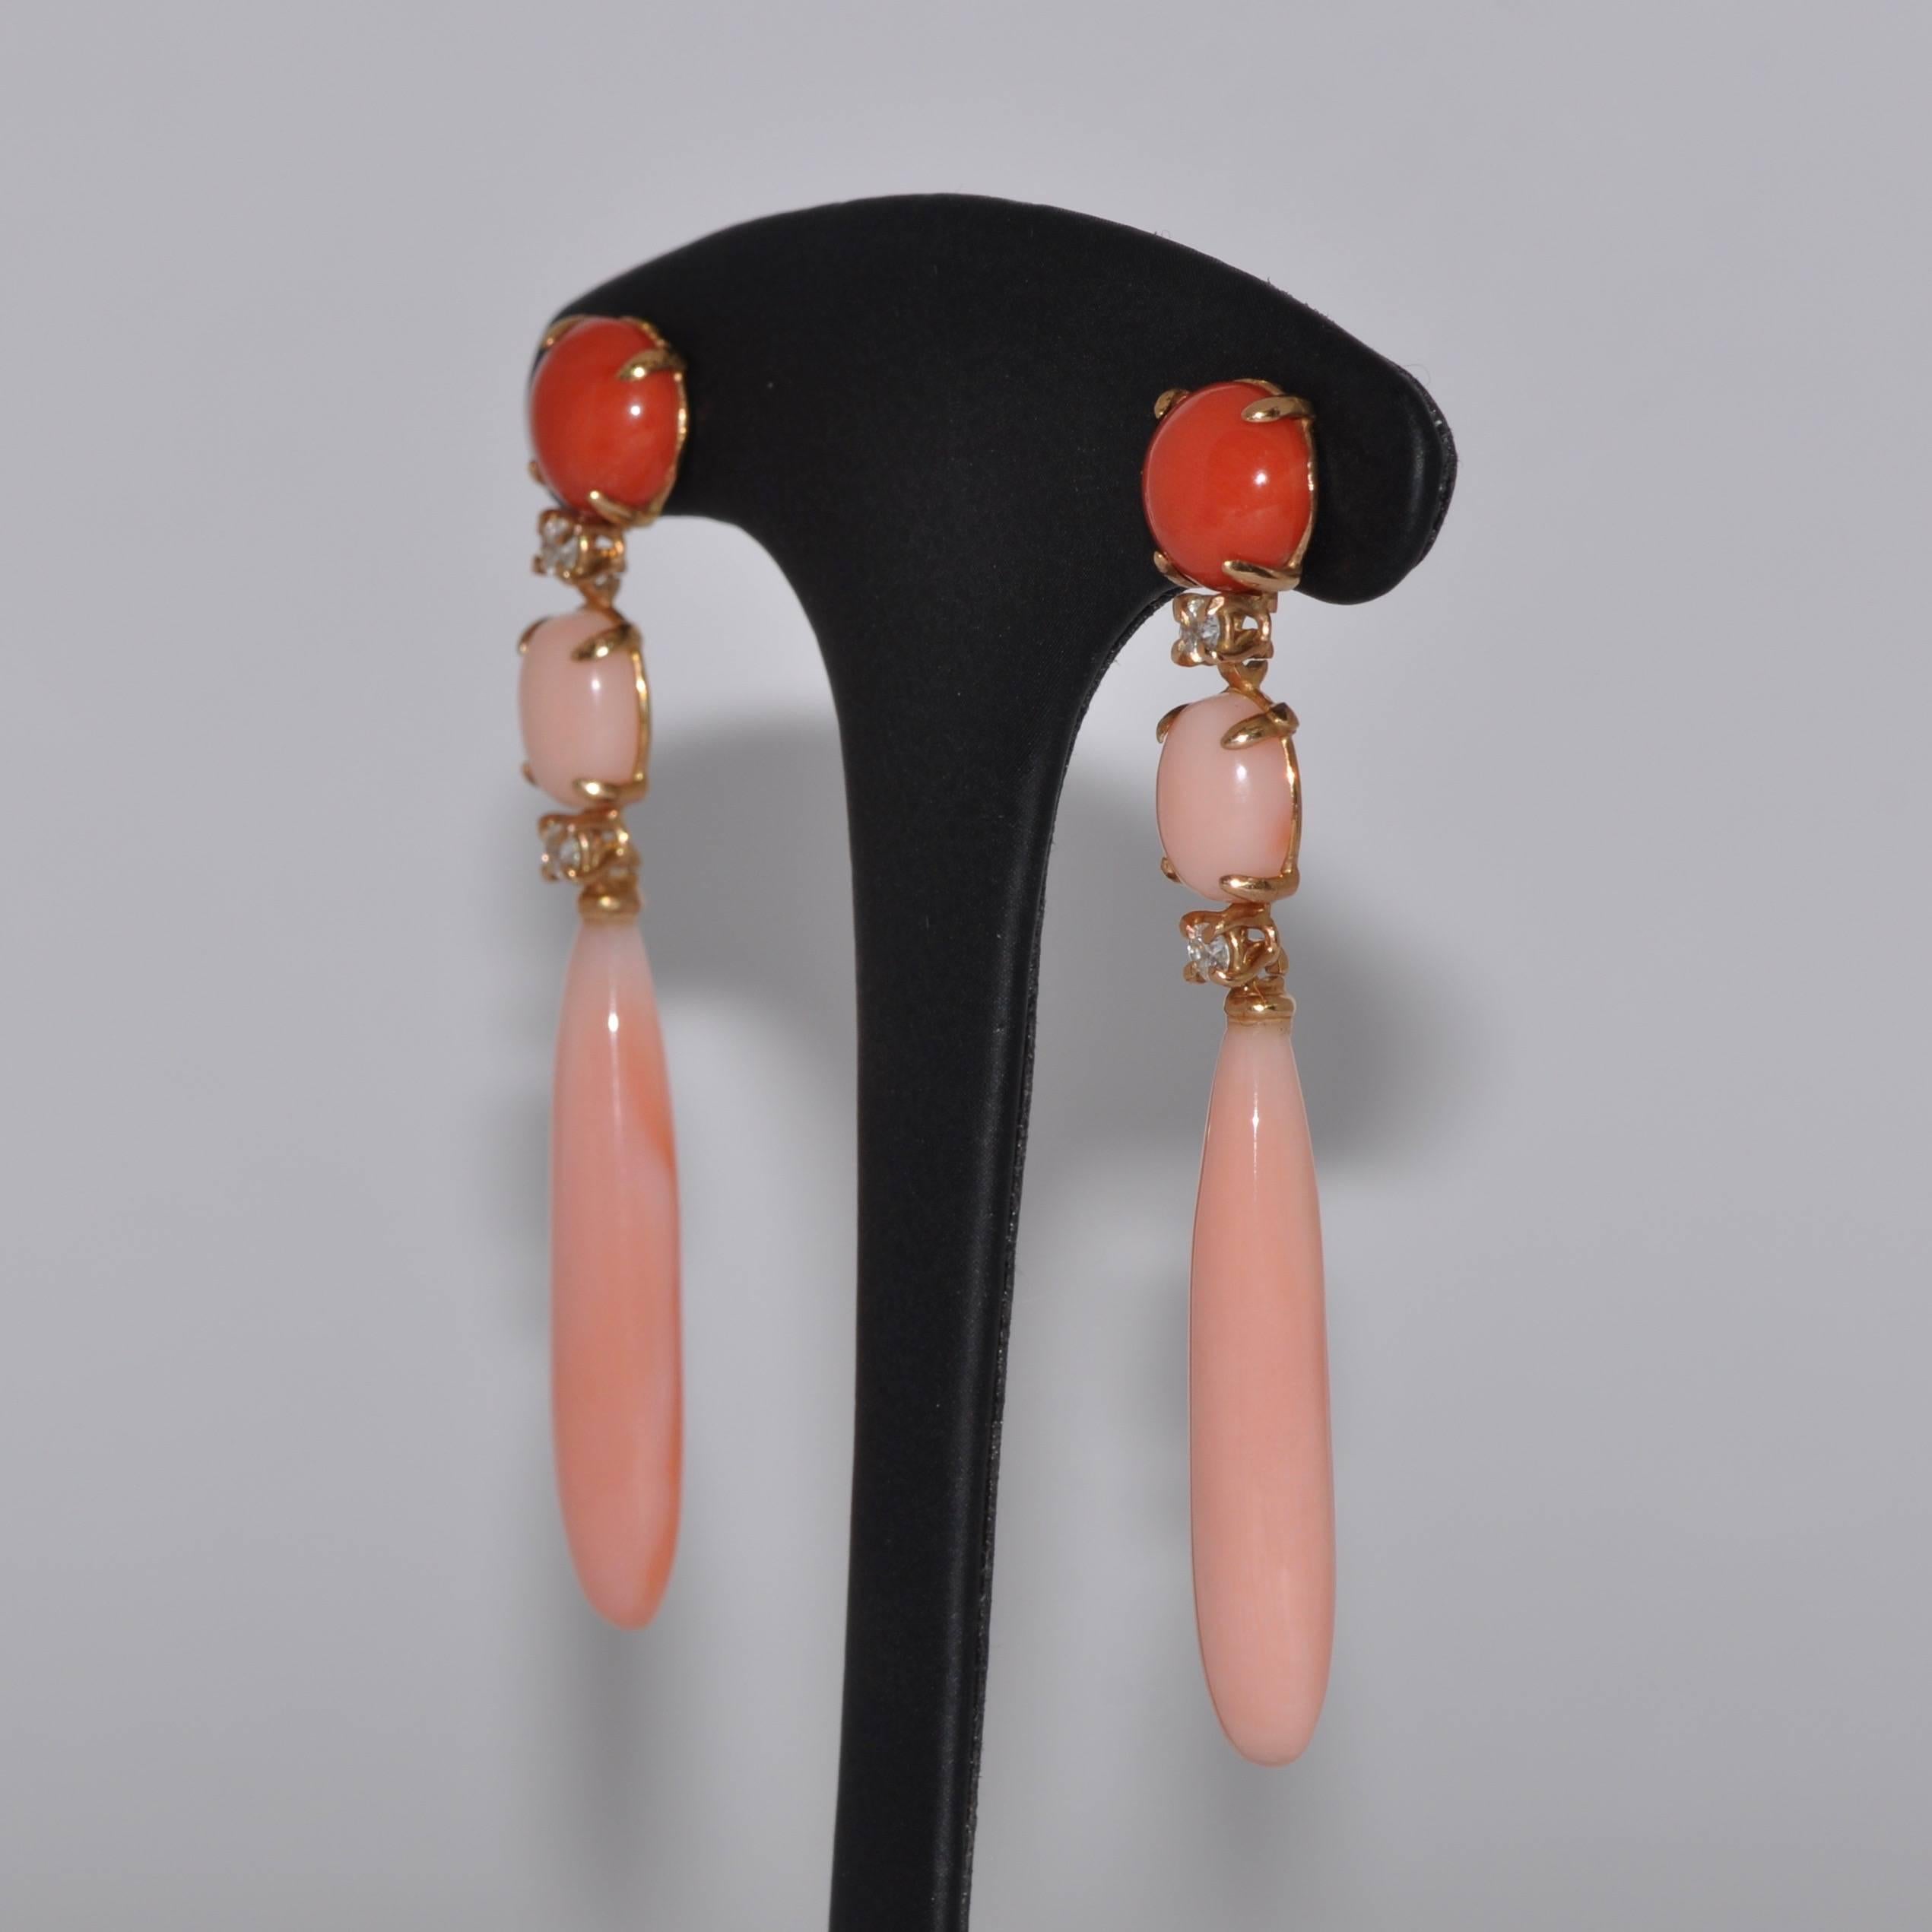 Carefully selected coral lends these earrings a vibrant, organic touch of color. Each piece of coral is carefully cut and polished, highlighting its unique texture and natural nuances. The warm, shimmering tones of the coral add a touch of